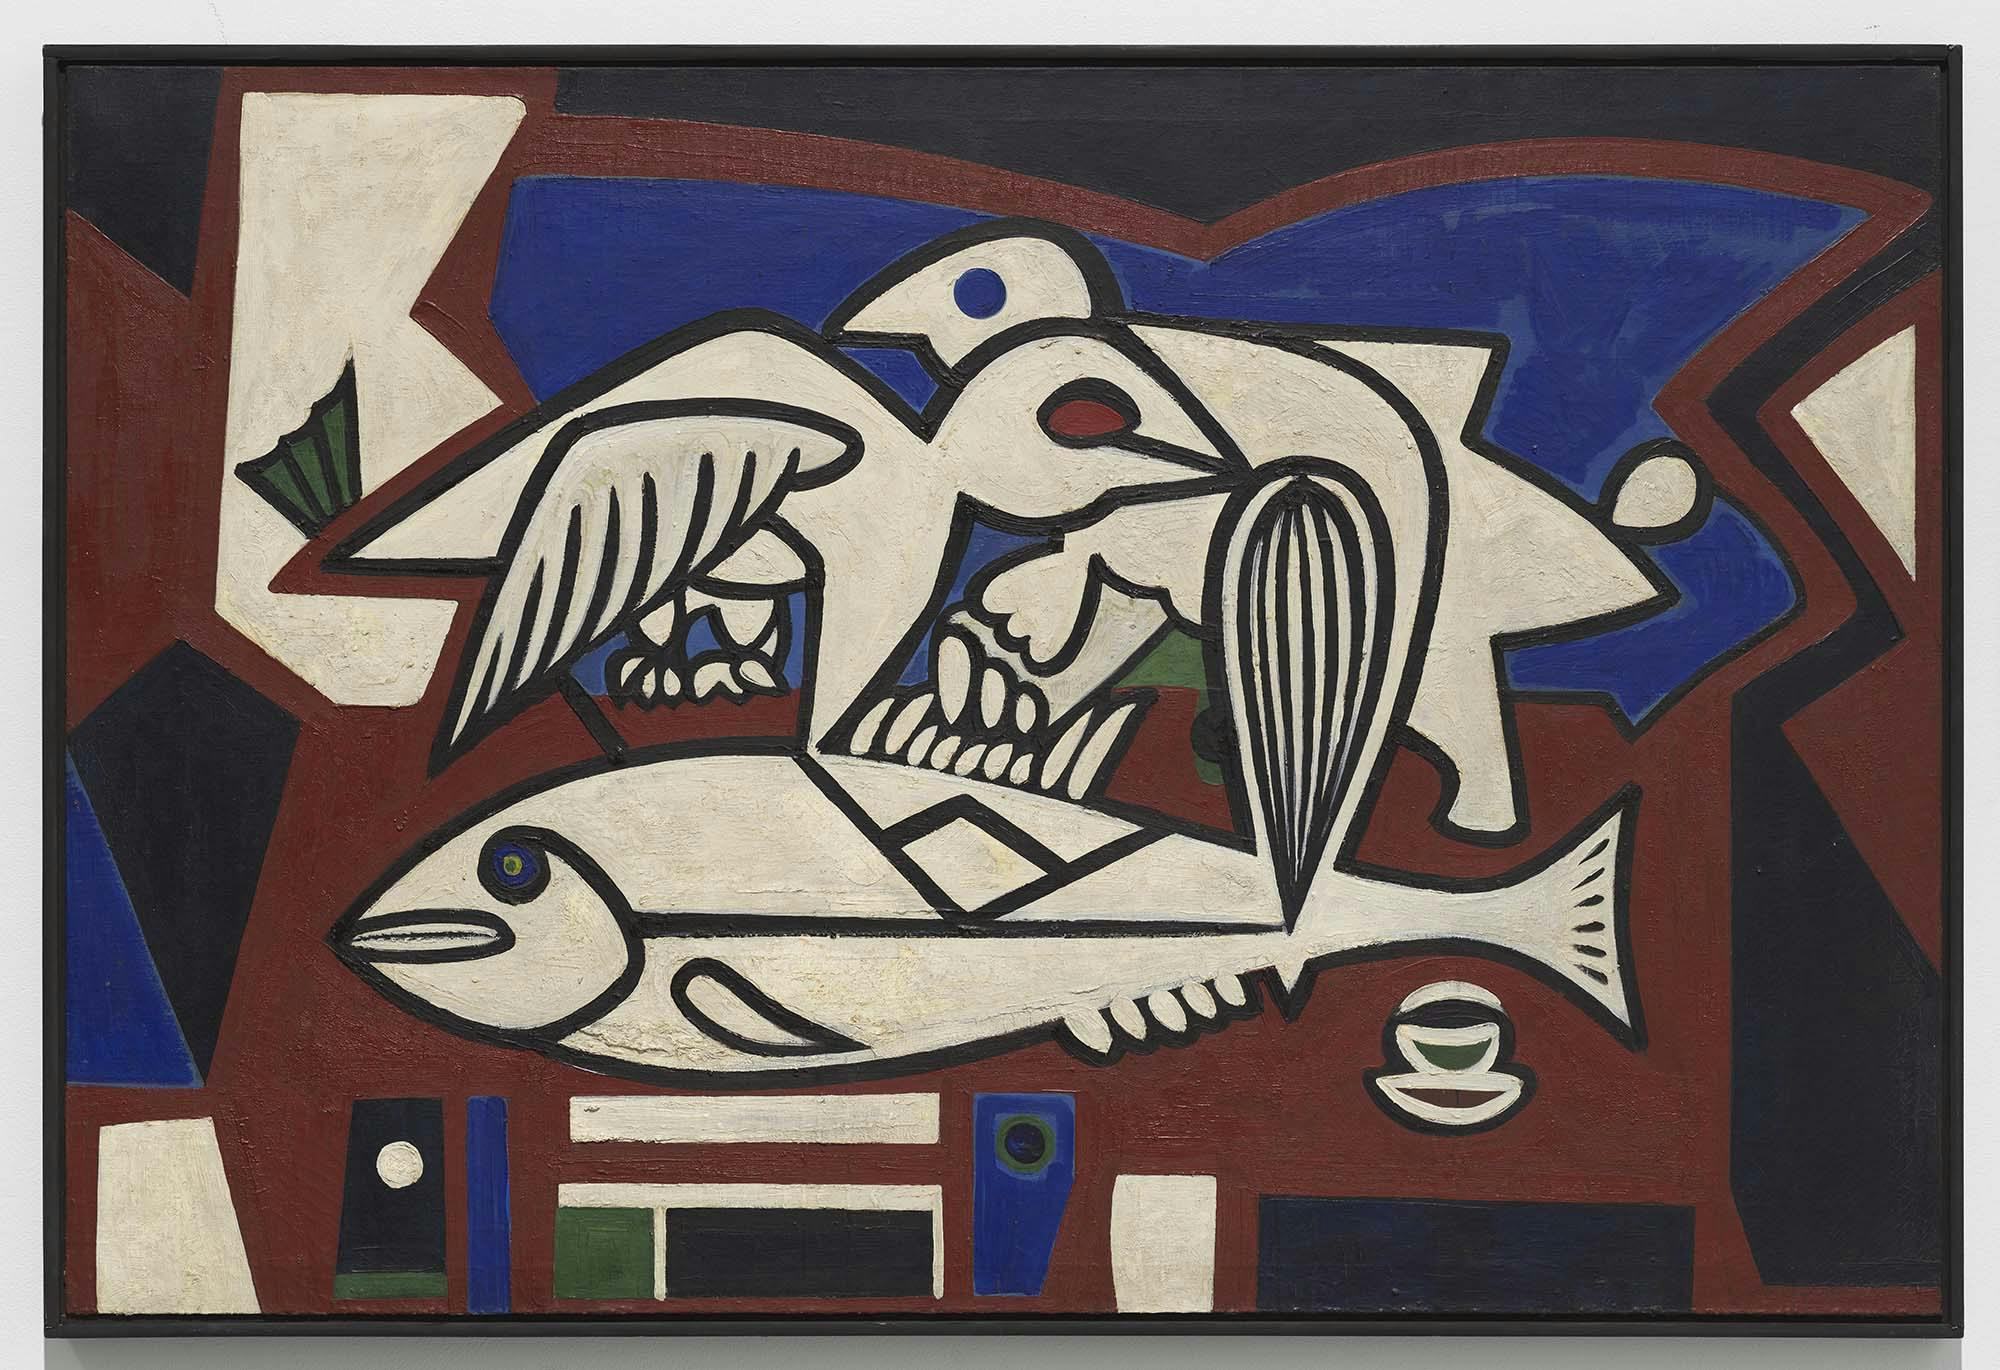 Birds and Fish
1939
Oil on linen
39 1/2 x 60 in. (100.3 x 152.4 cm)
 – The Richard Pousette-Dart Foundation